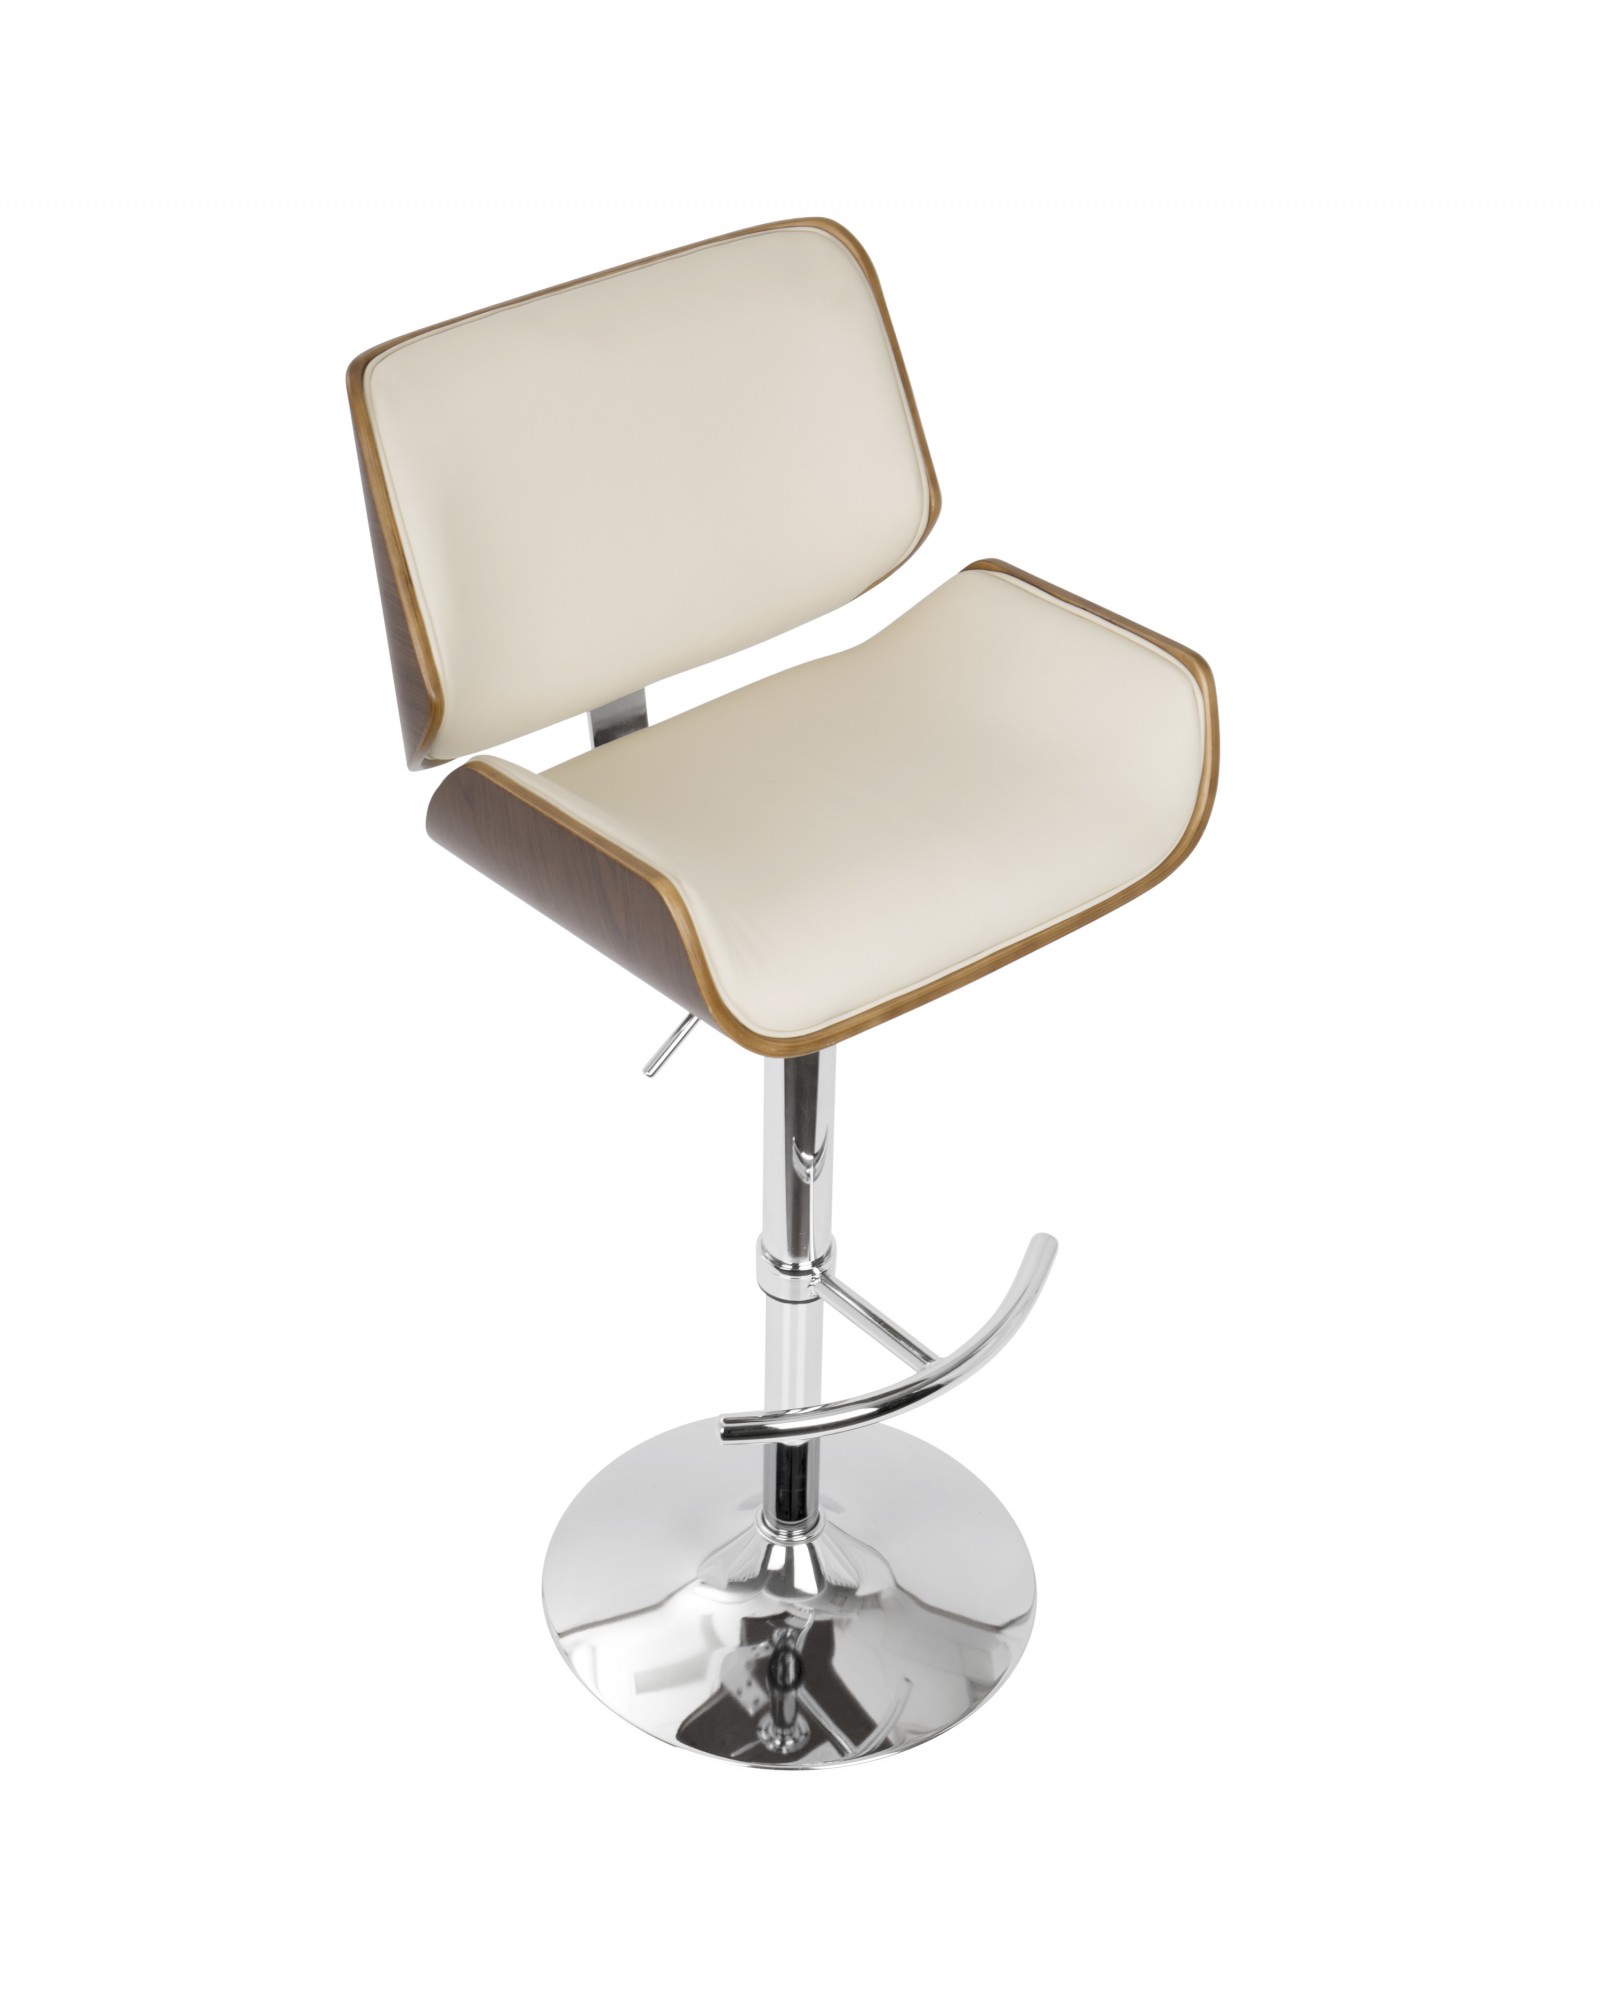 Santi Mid-Century Modern Adjustable Barstool with Swivel in Walnut and Cream Faux Leather